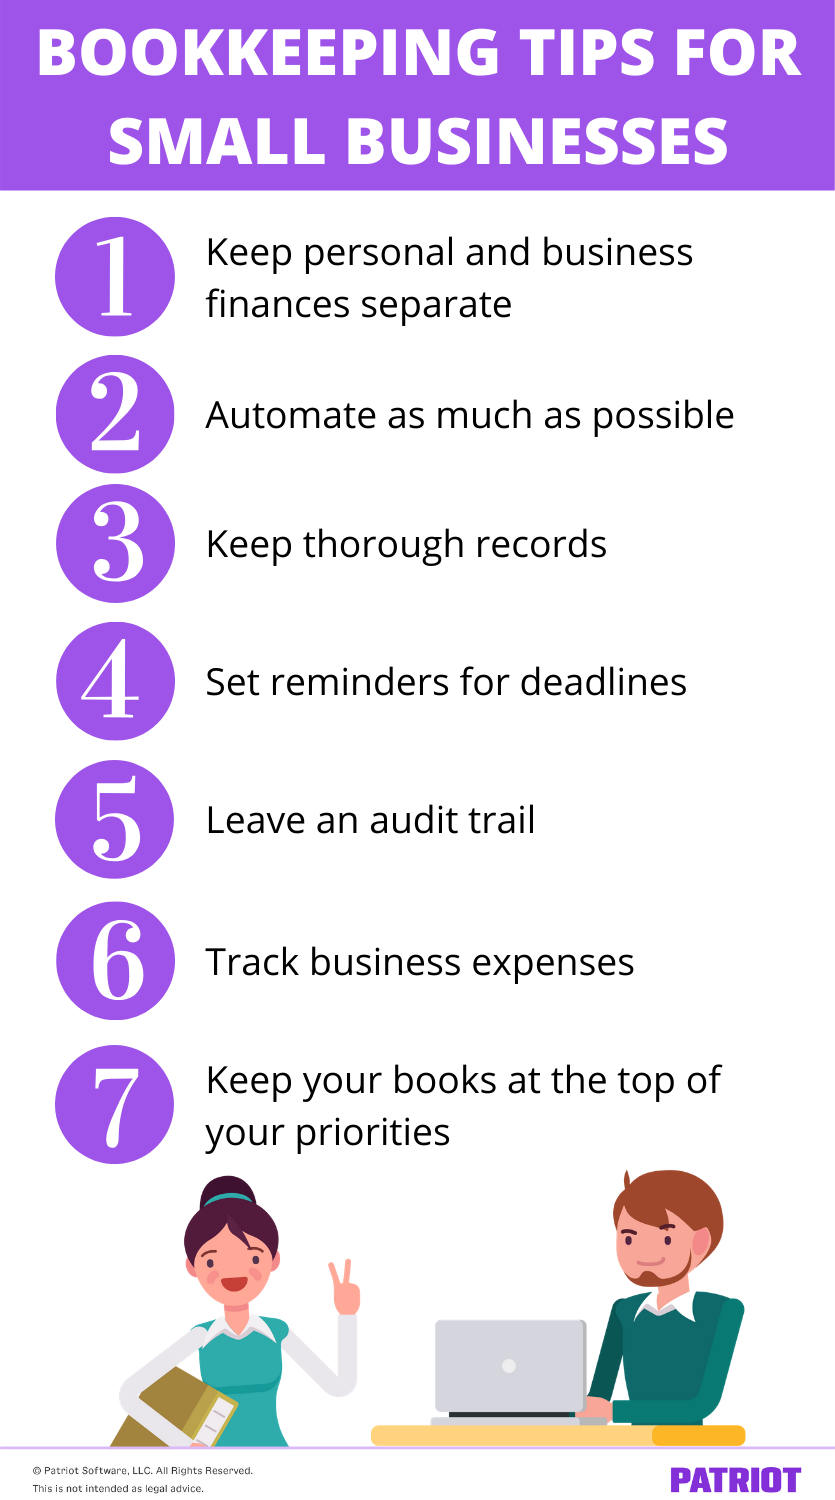 list of bookkeeping tips for small businesses with illustration of man on computer and woman holding accounting books